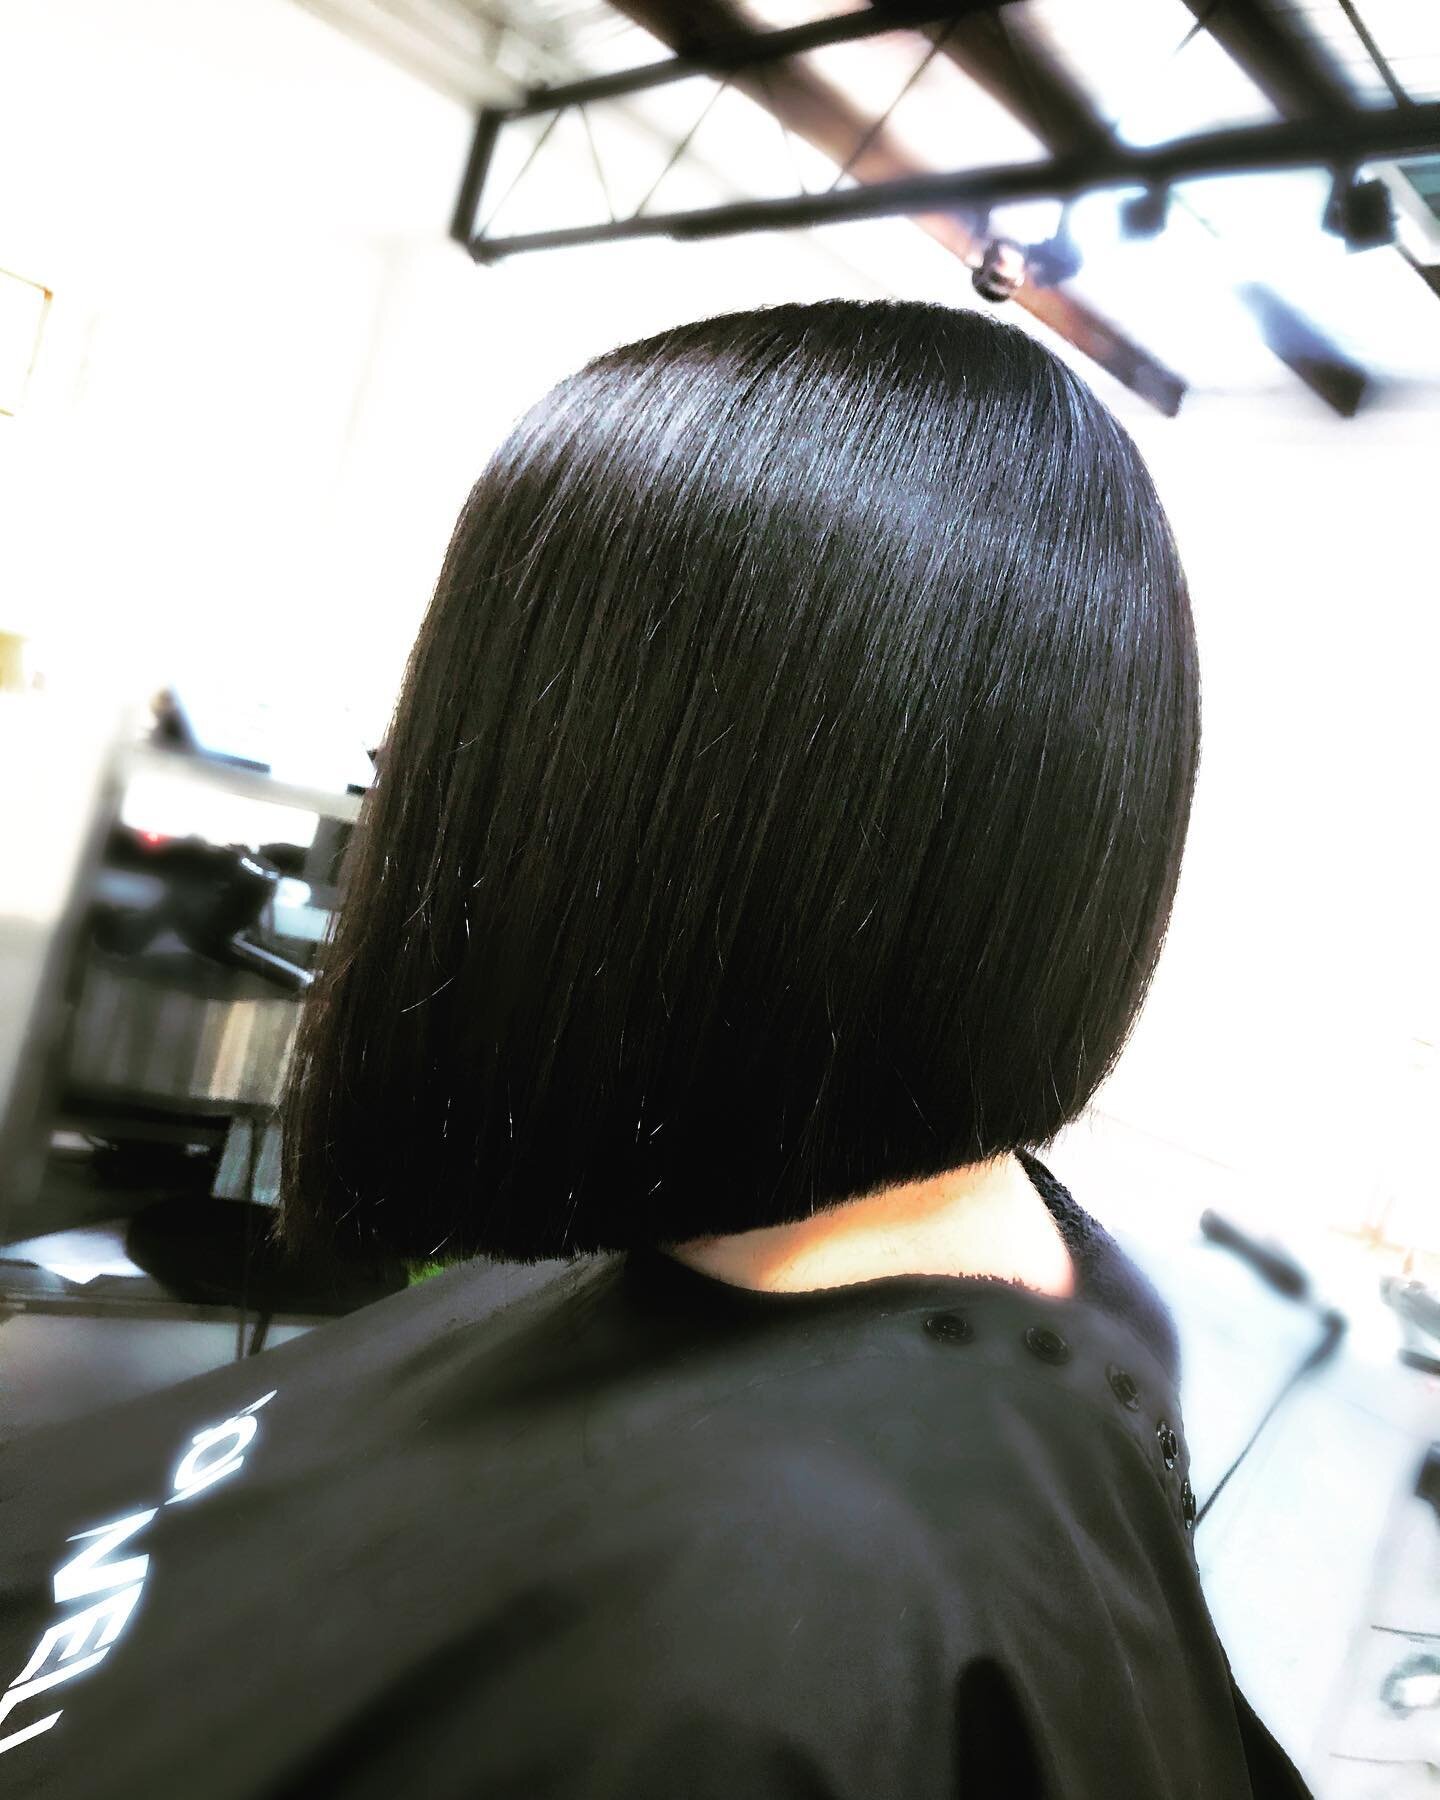 Sleek as! #naturalbrunette blunt crop fits perfectly with a giant scarf for winter ;) #clientlove #salonproof #solstice